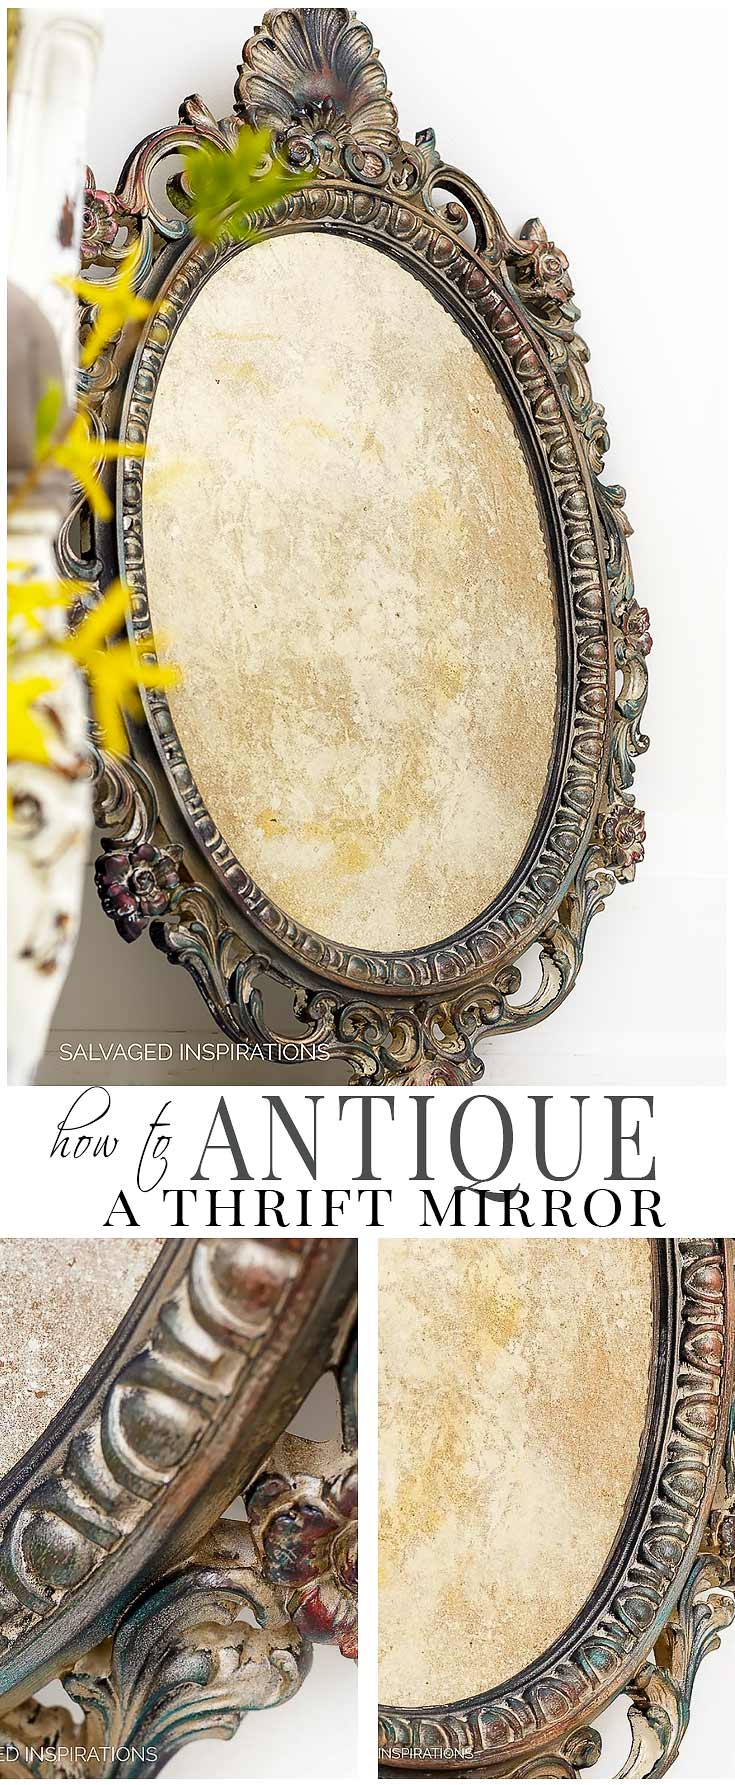 How To Antique A Plastic Thrift Mirror